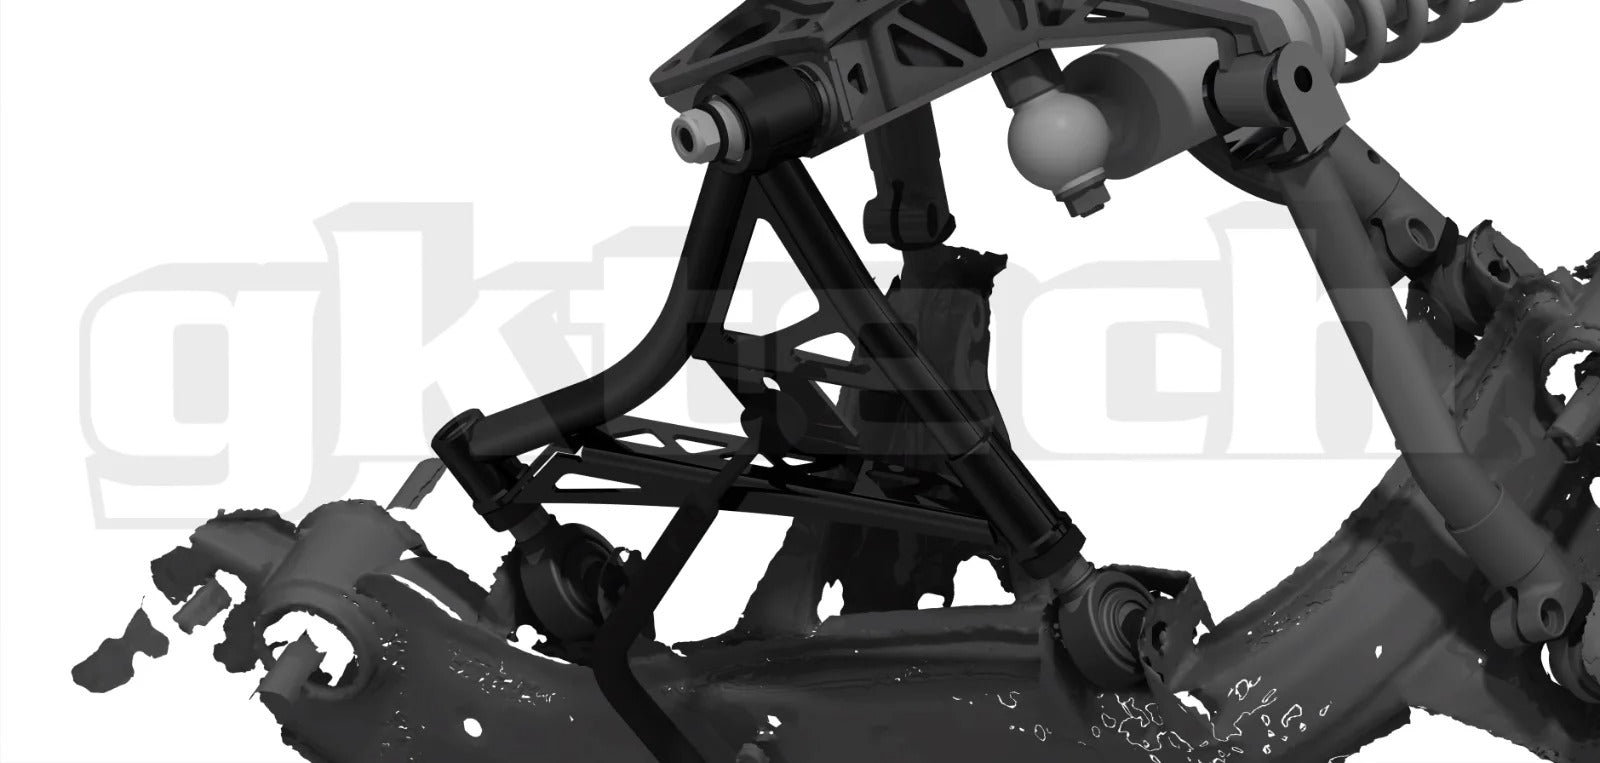 S/R chassis rear suspension package - 20% off